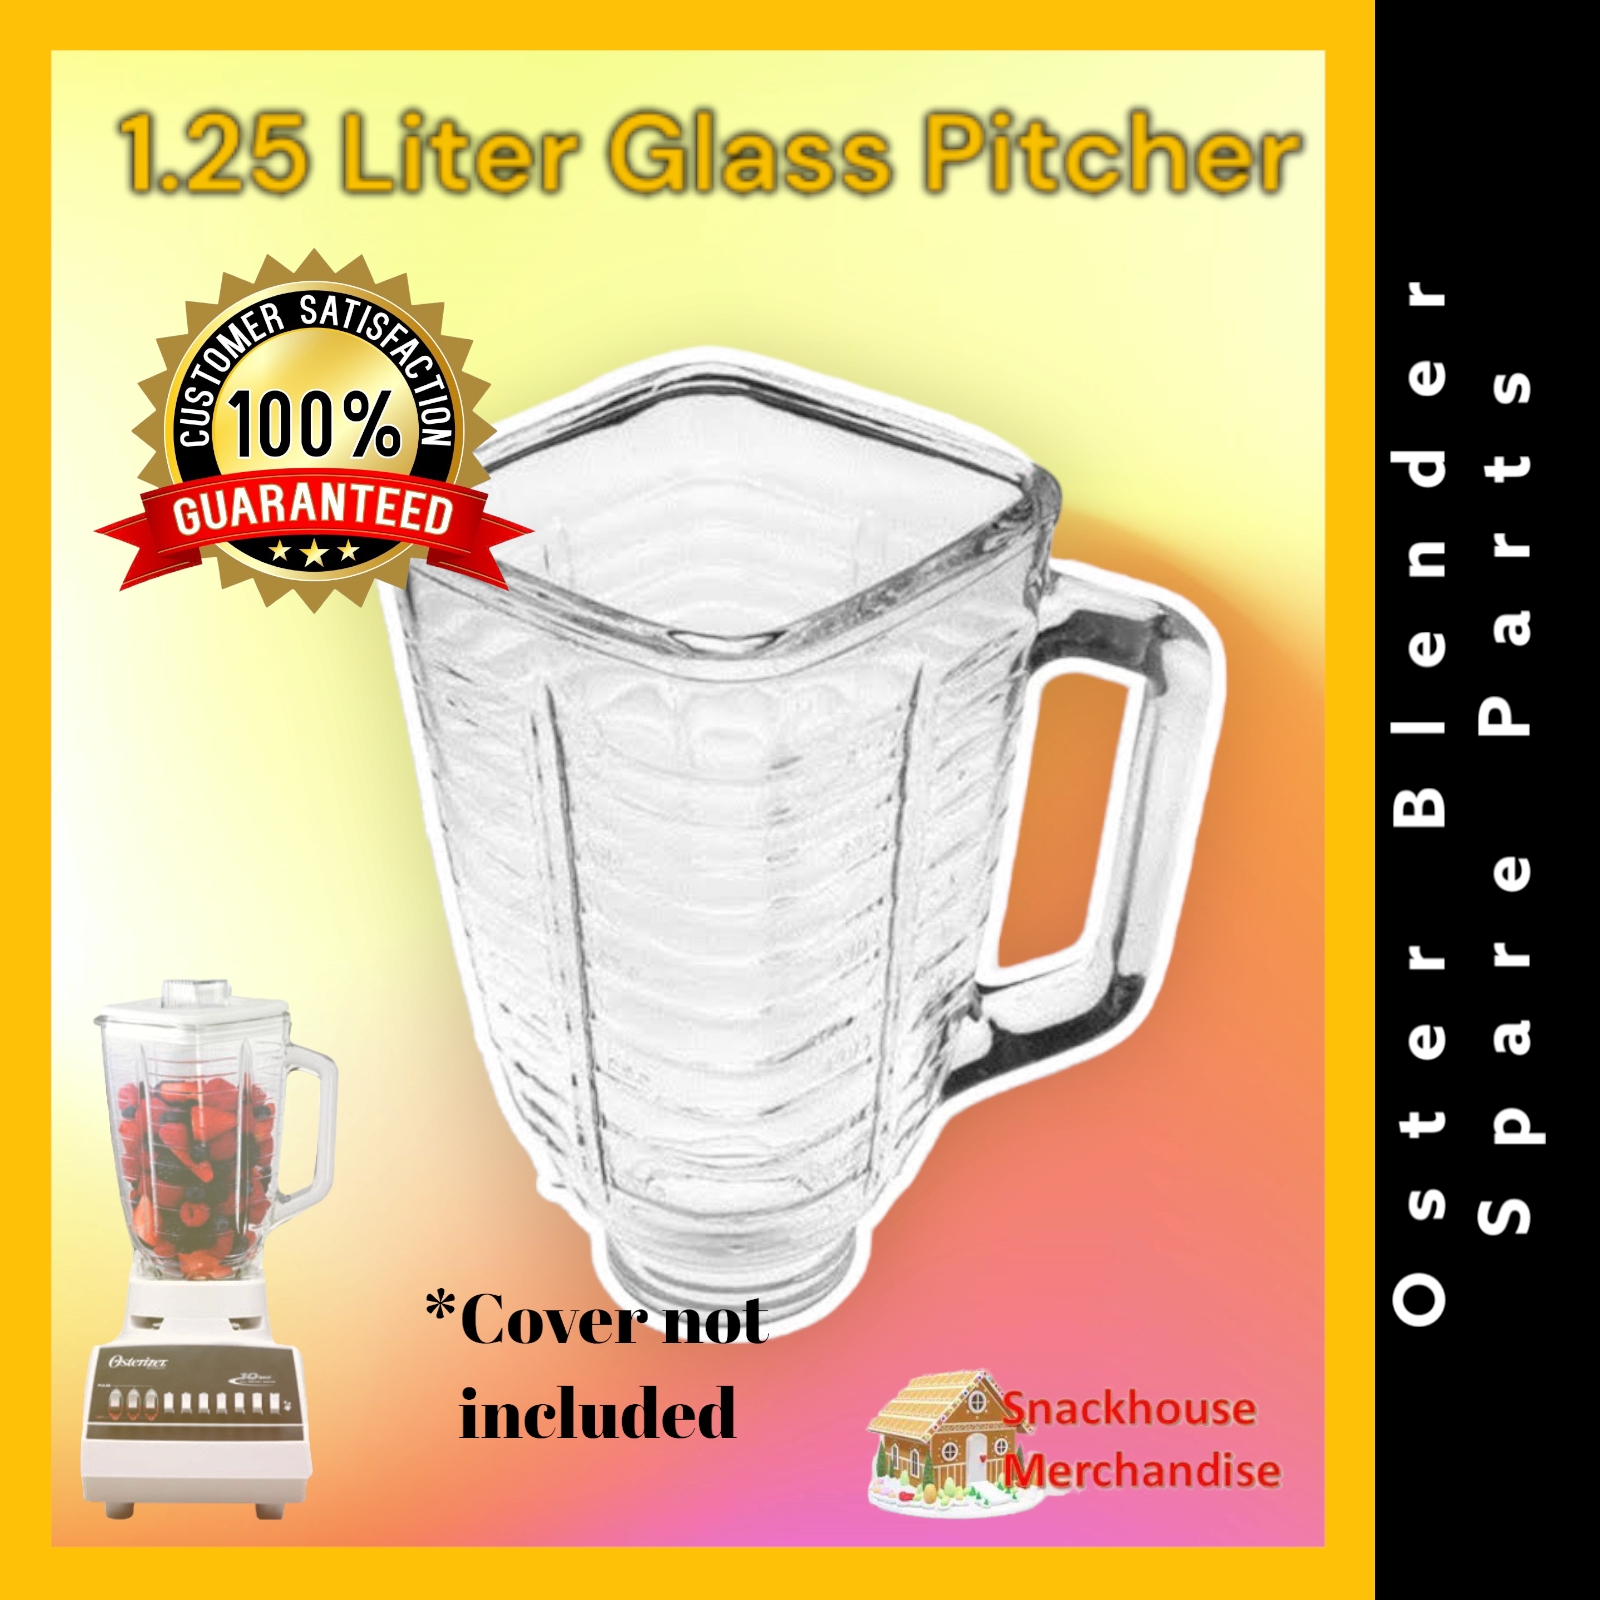 Spare Part Simple Pitcher for Belogia BL-6MC Blender Without Blades